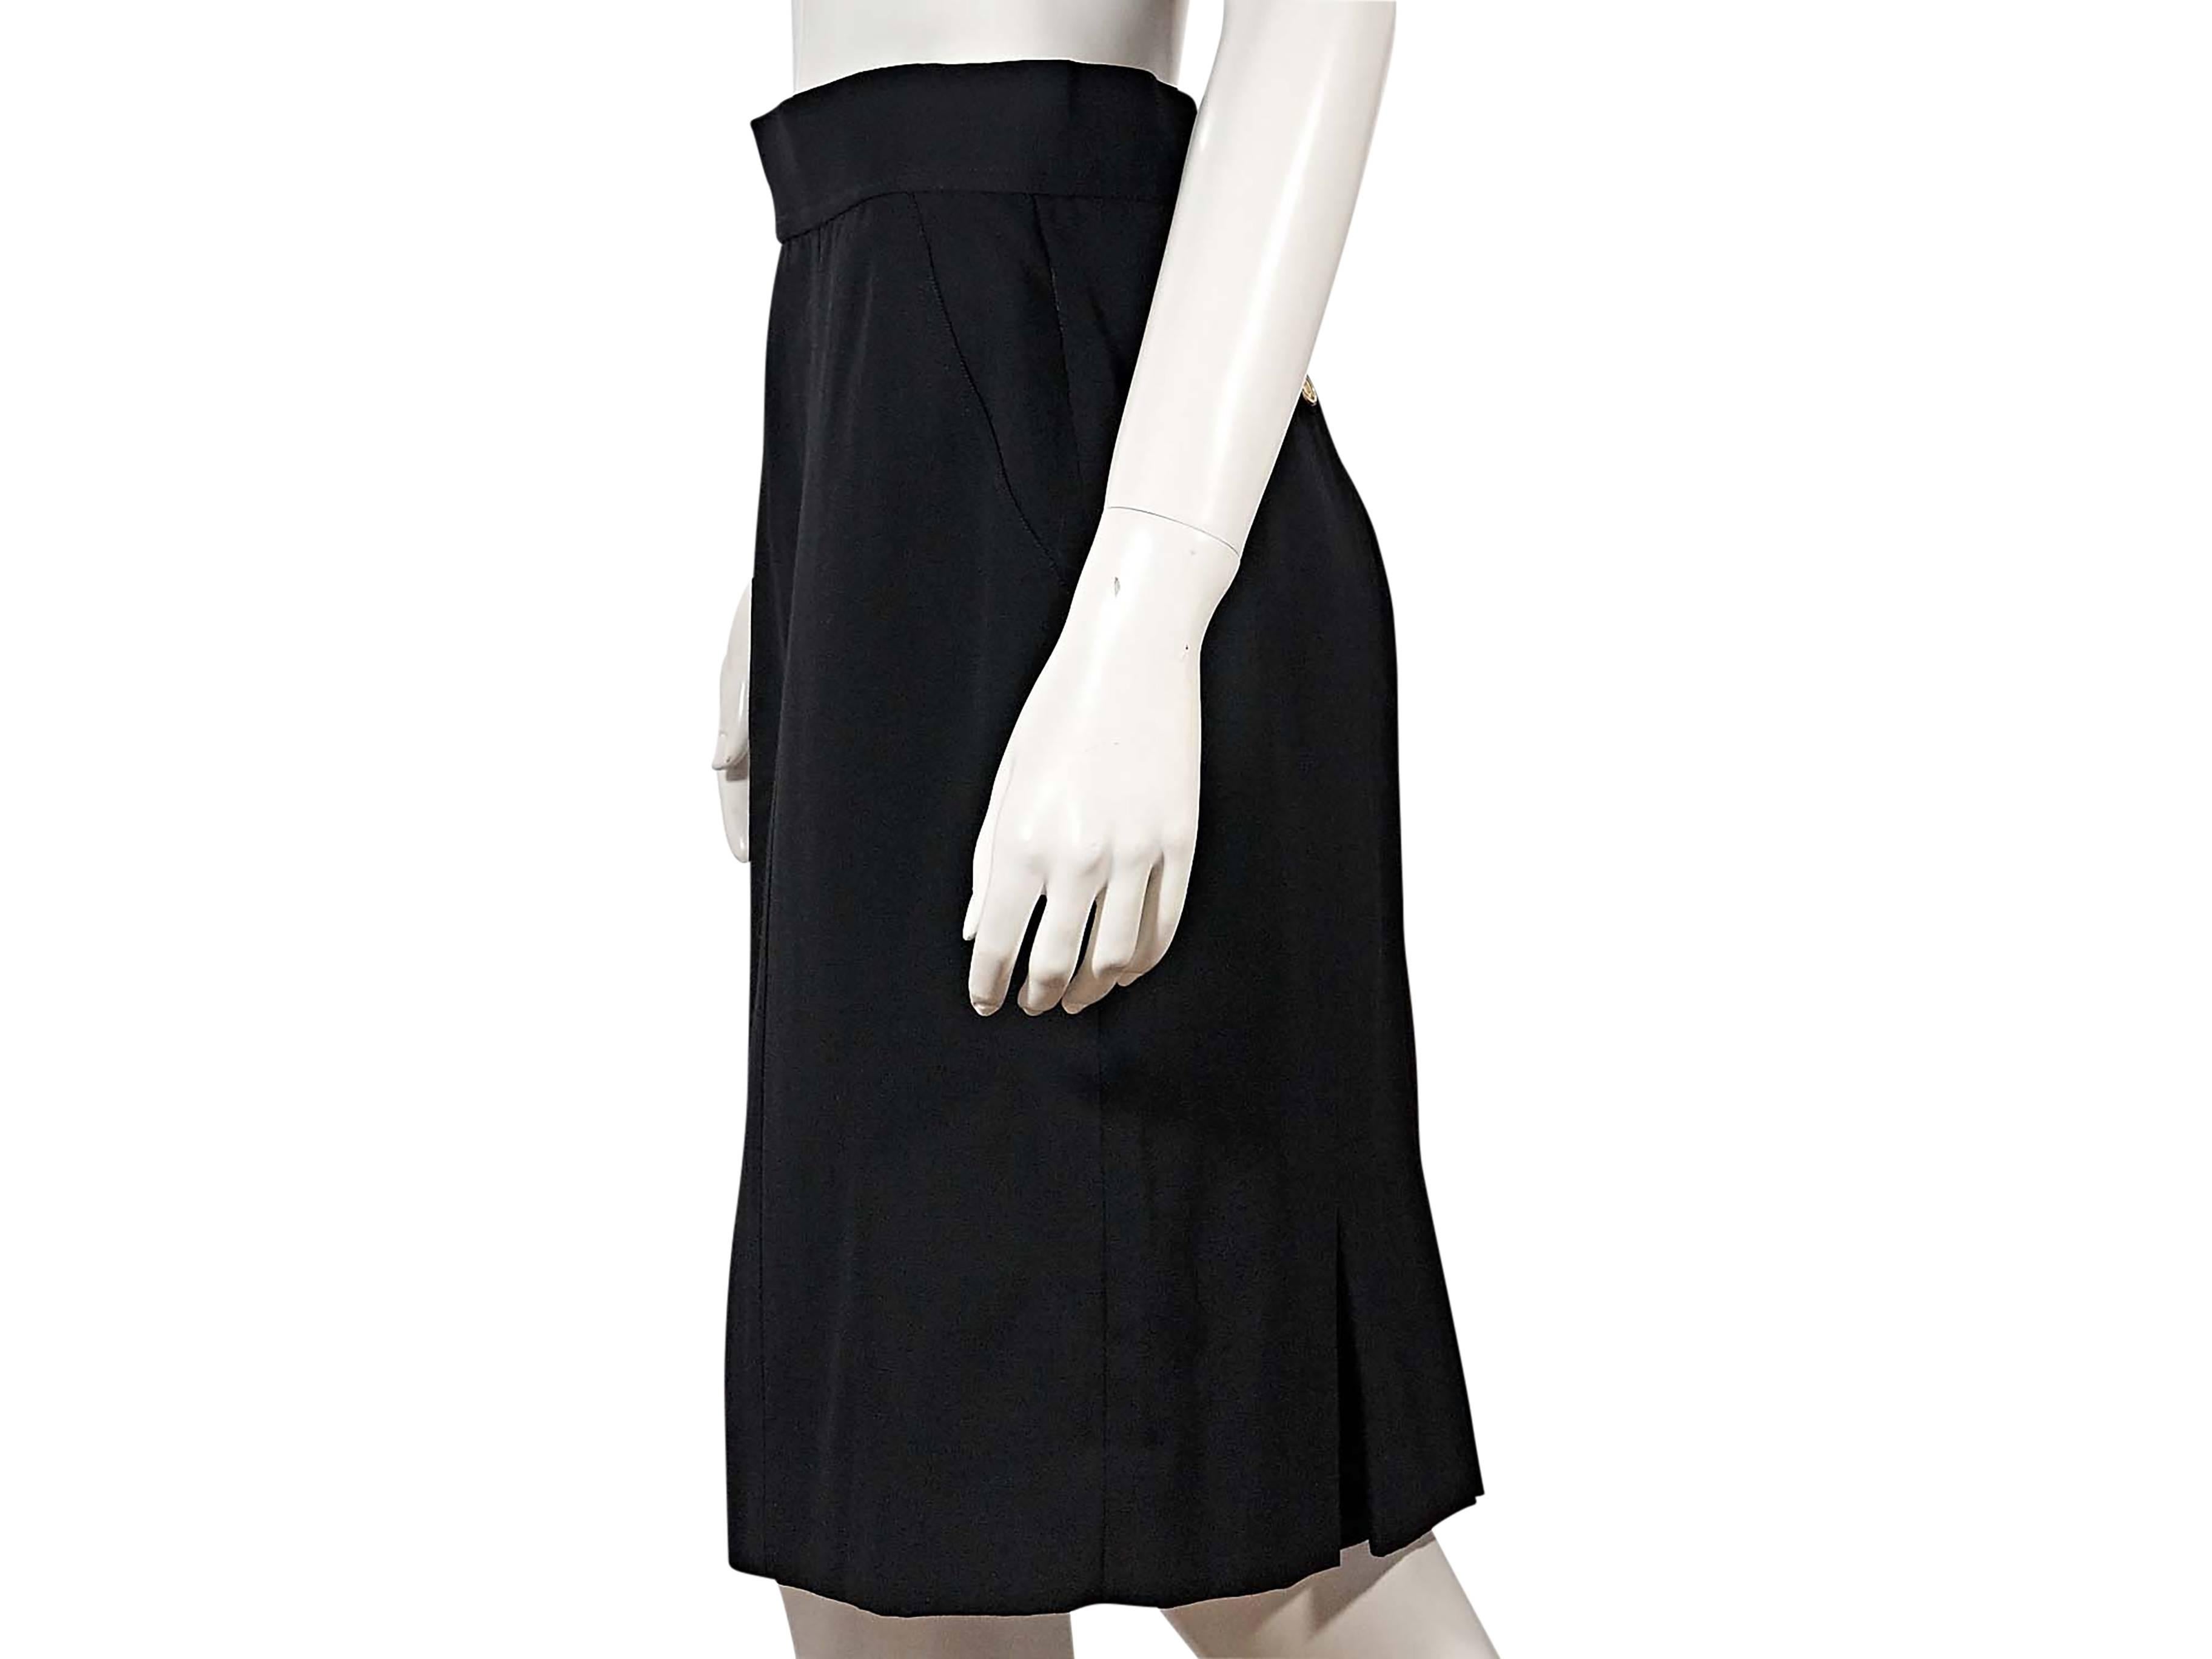 Product details:  Vintage black skirt by Chanel.  Banded waist.  Double button and concealed back zip closure.  Back besom button pockets.  Back inverted pleat hem vent.  
Condition: Very good. 